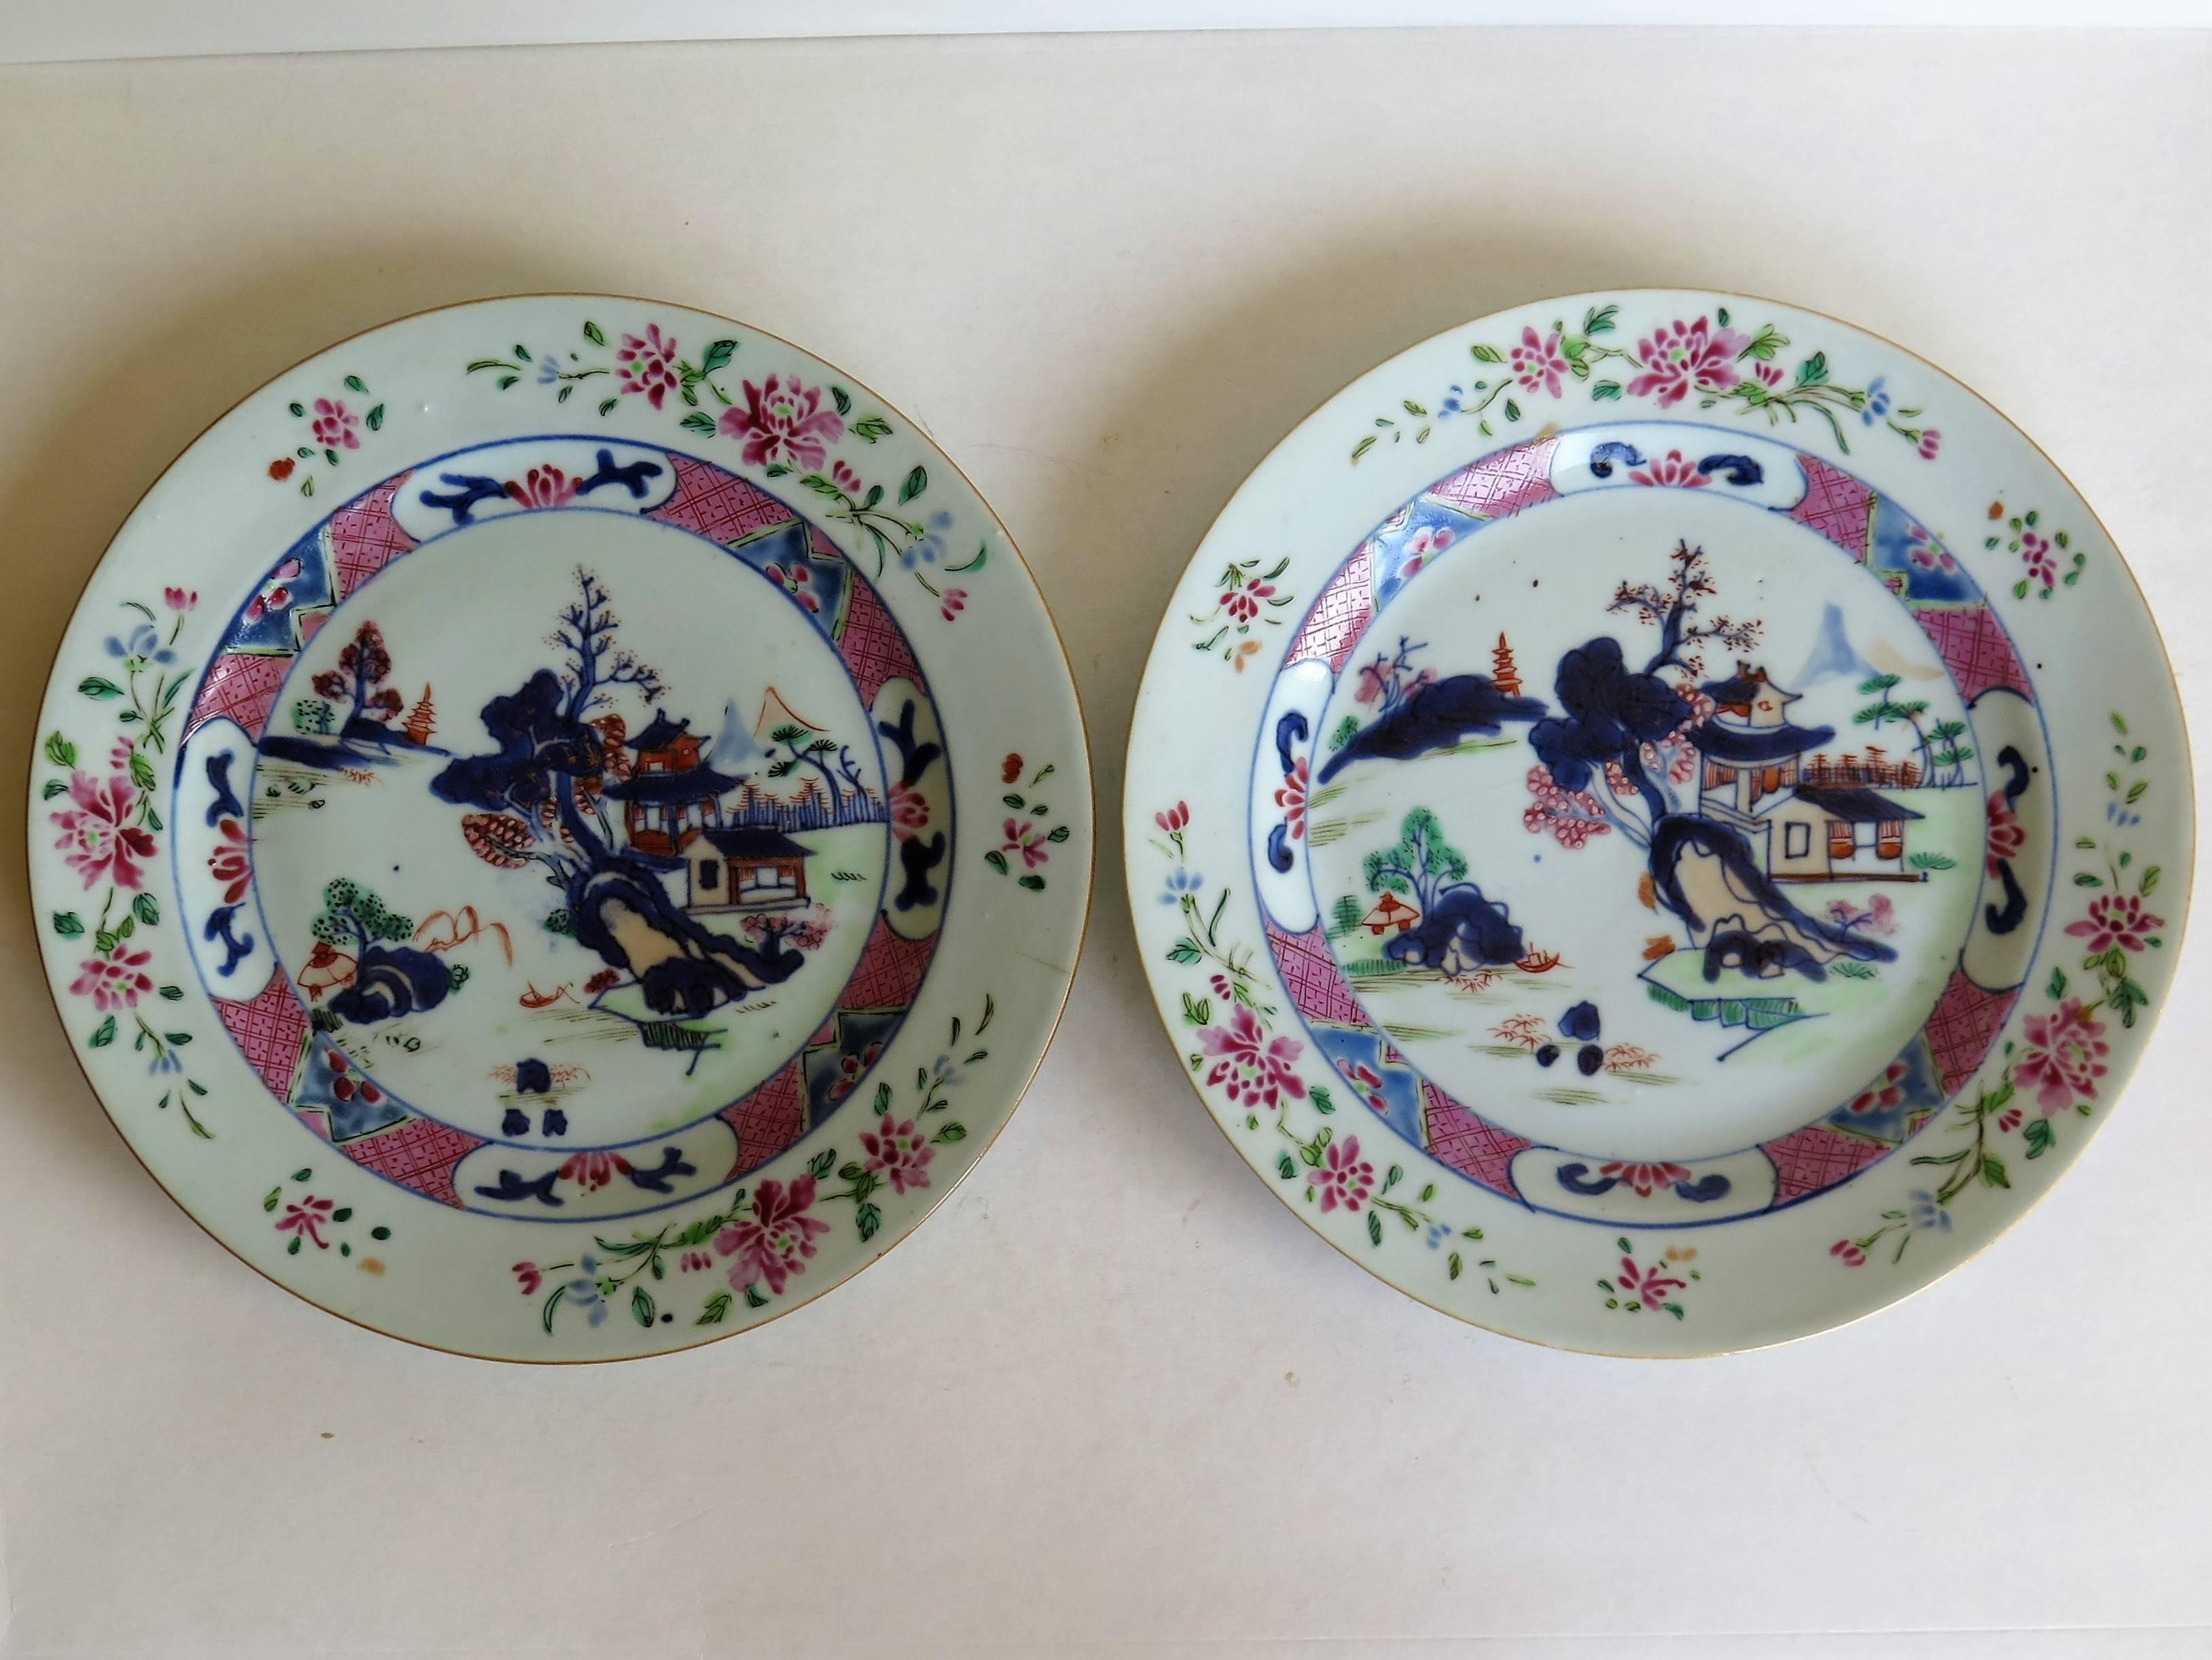 These are a very good pair of mid 18th century, Chinese Export porcelain plates, which we date to the Qing, Qianlong period (1736-1795), circa 1760.

The plates are nicely hand decorated with the typical enamel colours of the Famille-rose palette of